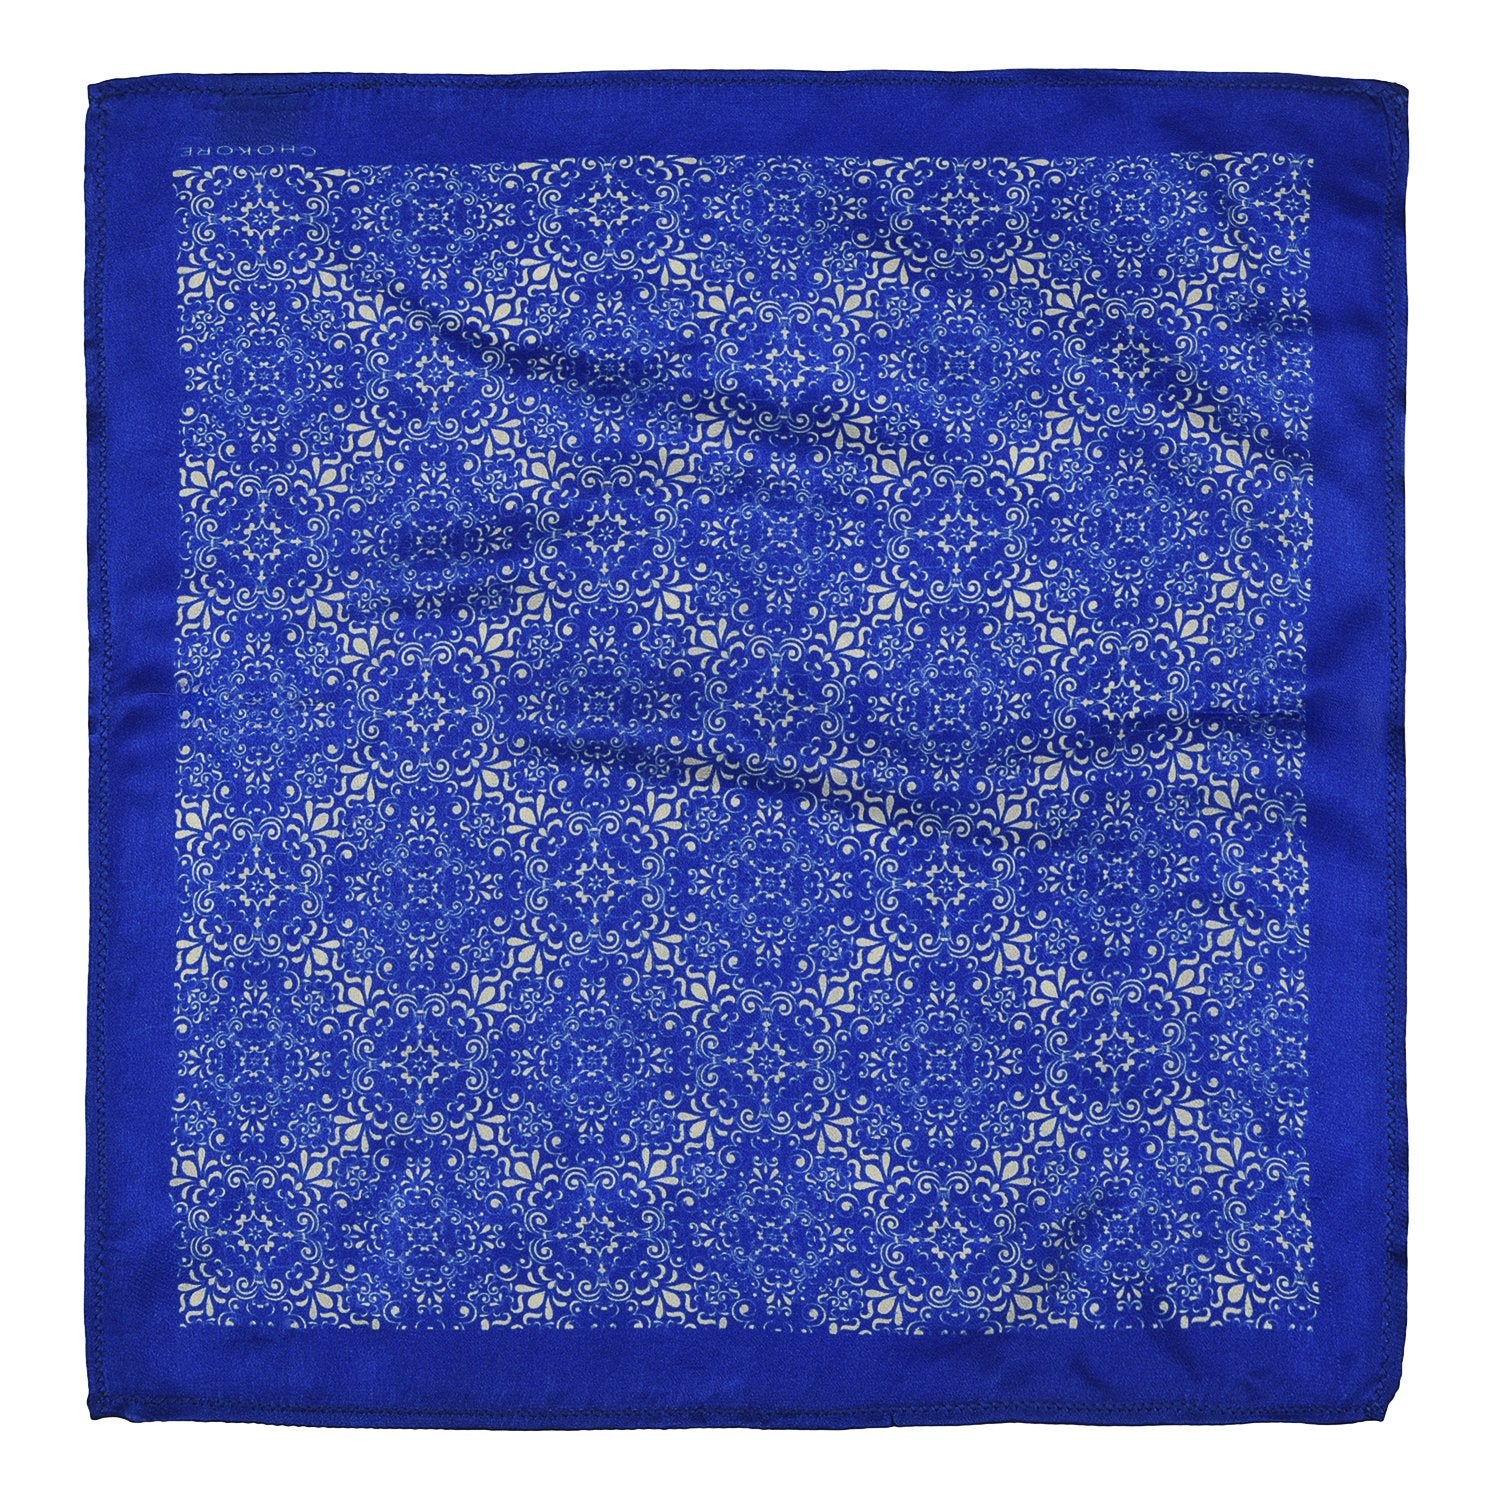 Chokore Cobalt Blue and White Silk Pocket Square -Indian At Heart line